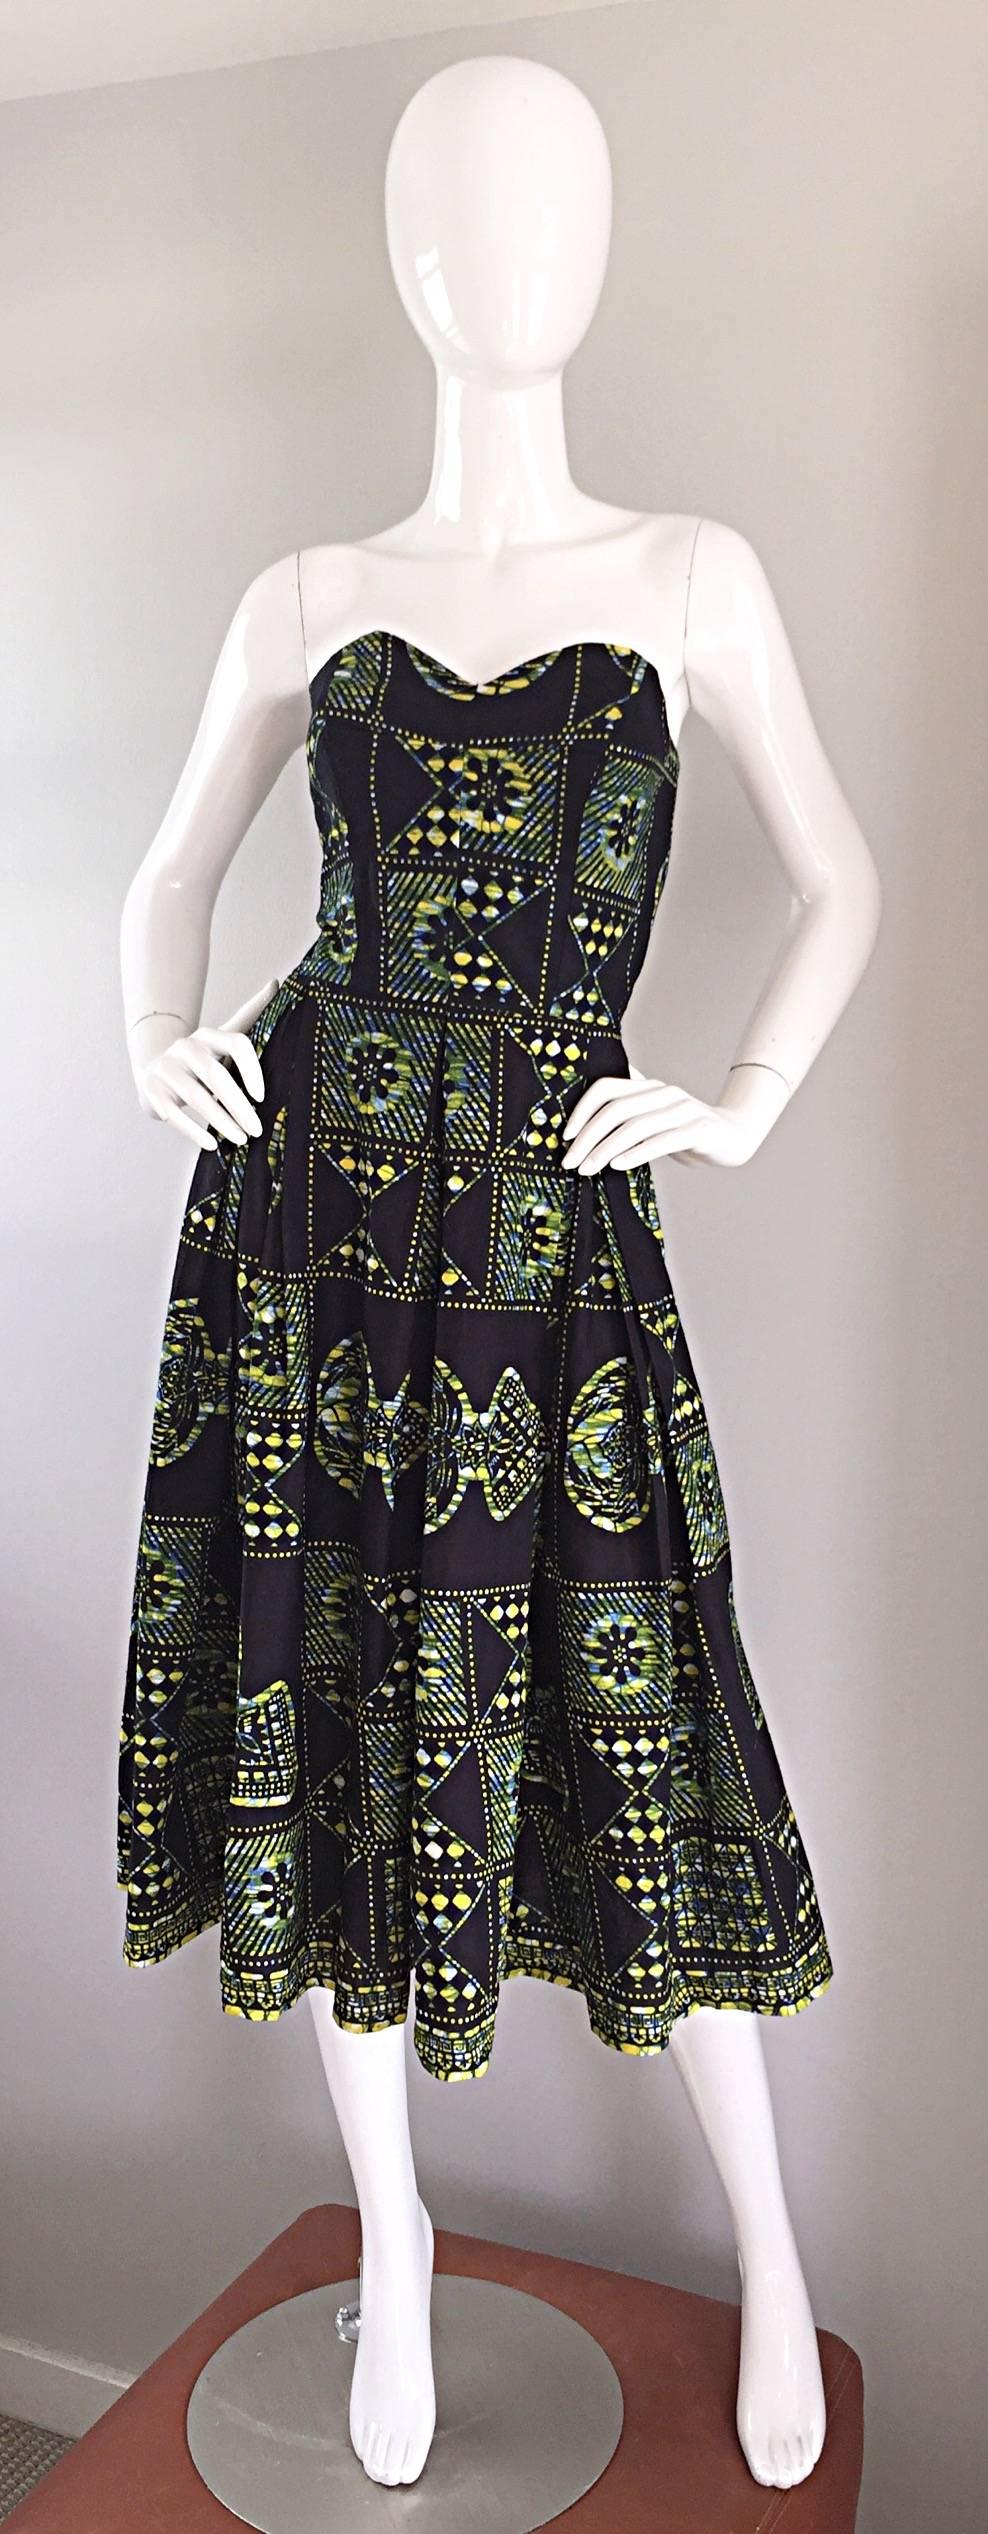 Bombshell vintage 50s strapless Hawaiian dress! Features an allover navy blue and yellow tribal print. Cotton fabric, with a boned bodice, and full skirt, which could easily accommodate a crinoline for an even fuller skirt. Full metal zipper up the